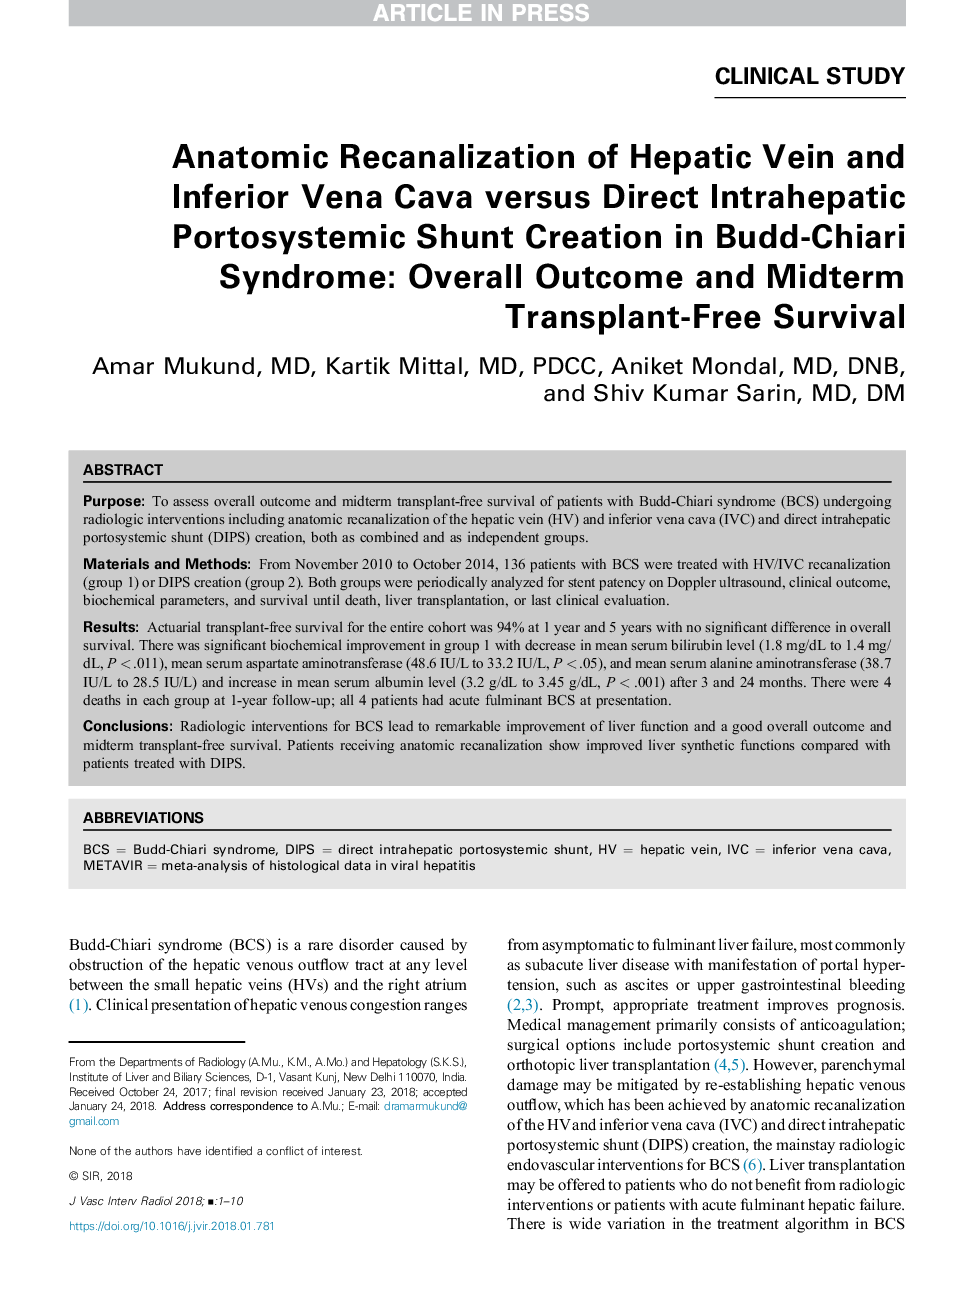 Anatomic Recanalization of Hepatic Vein and Inferior Vena Cava versus Direct Intrahepatic Portosystemic Shunt Creation in Budd-Chiari Syndrome: Overall Outcome and Midterm Transplant-Free Survival